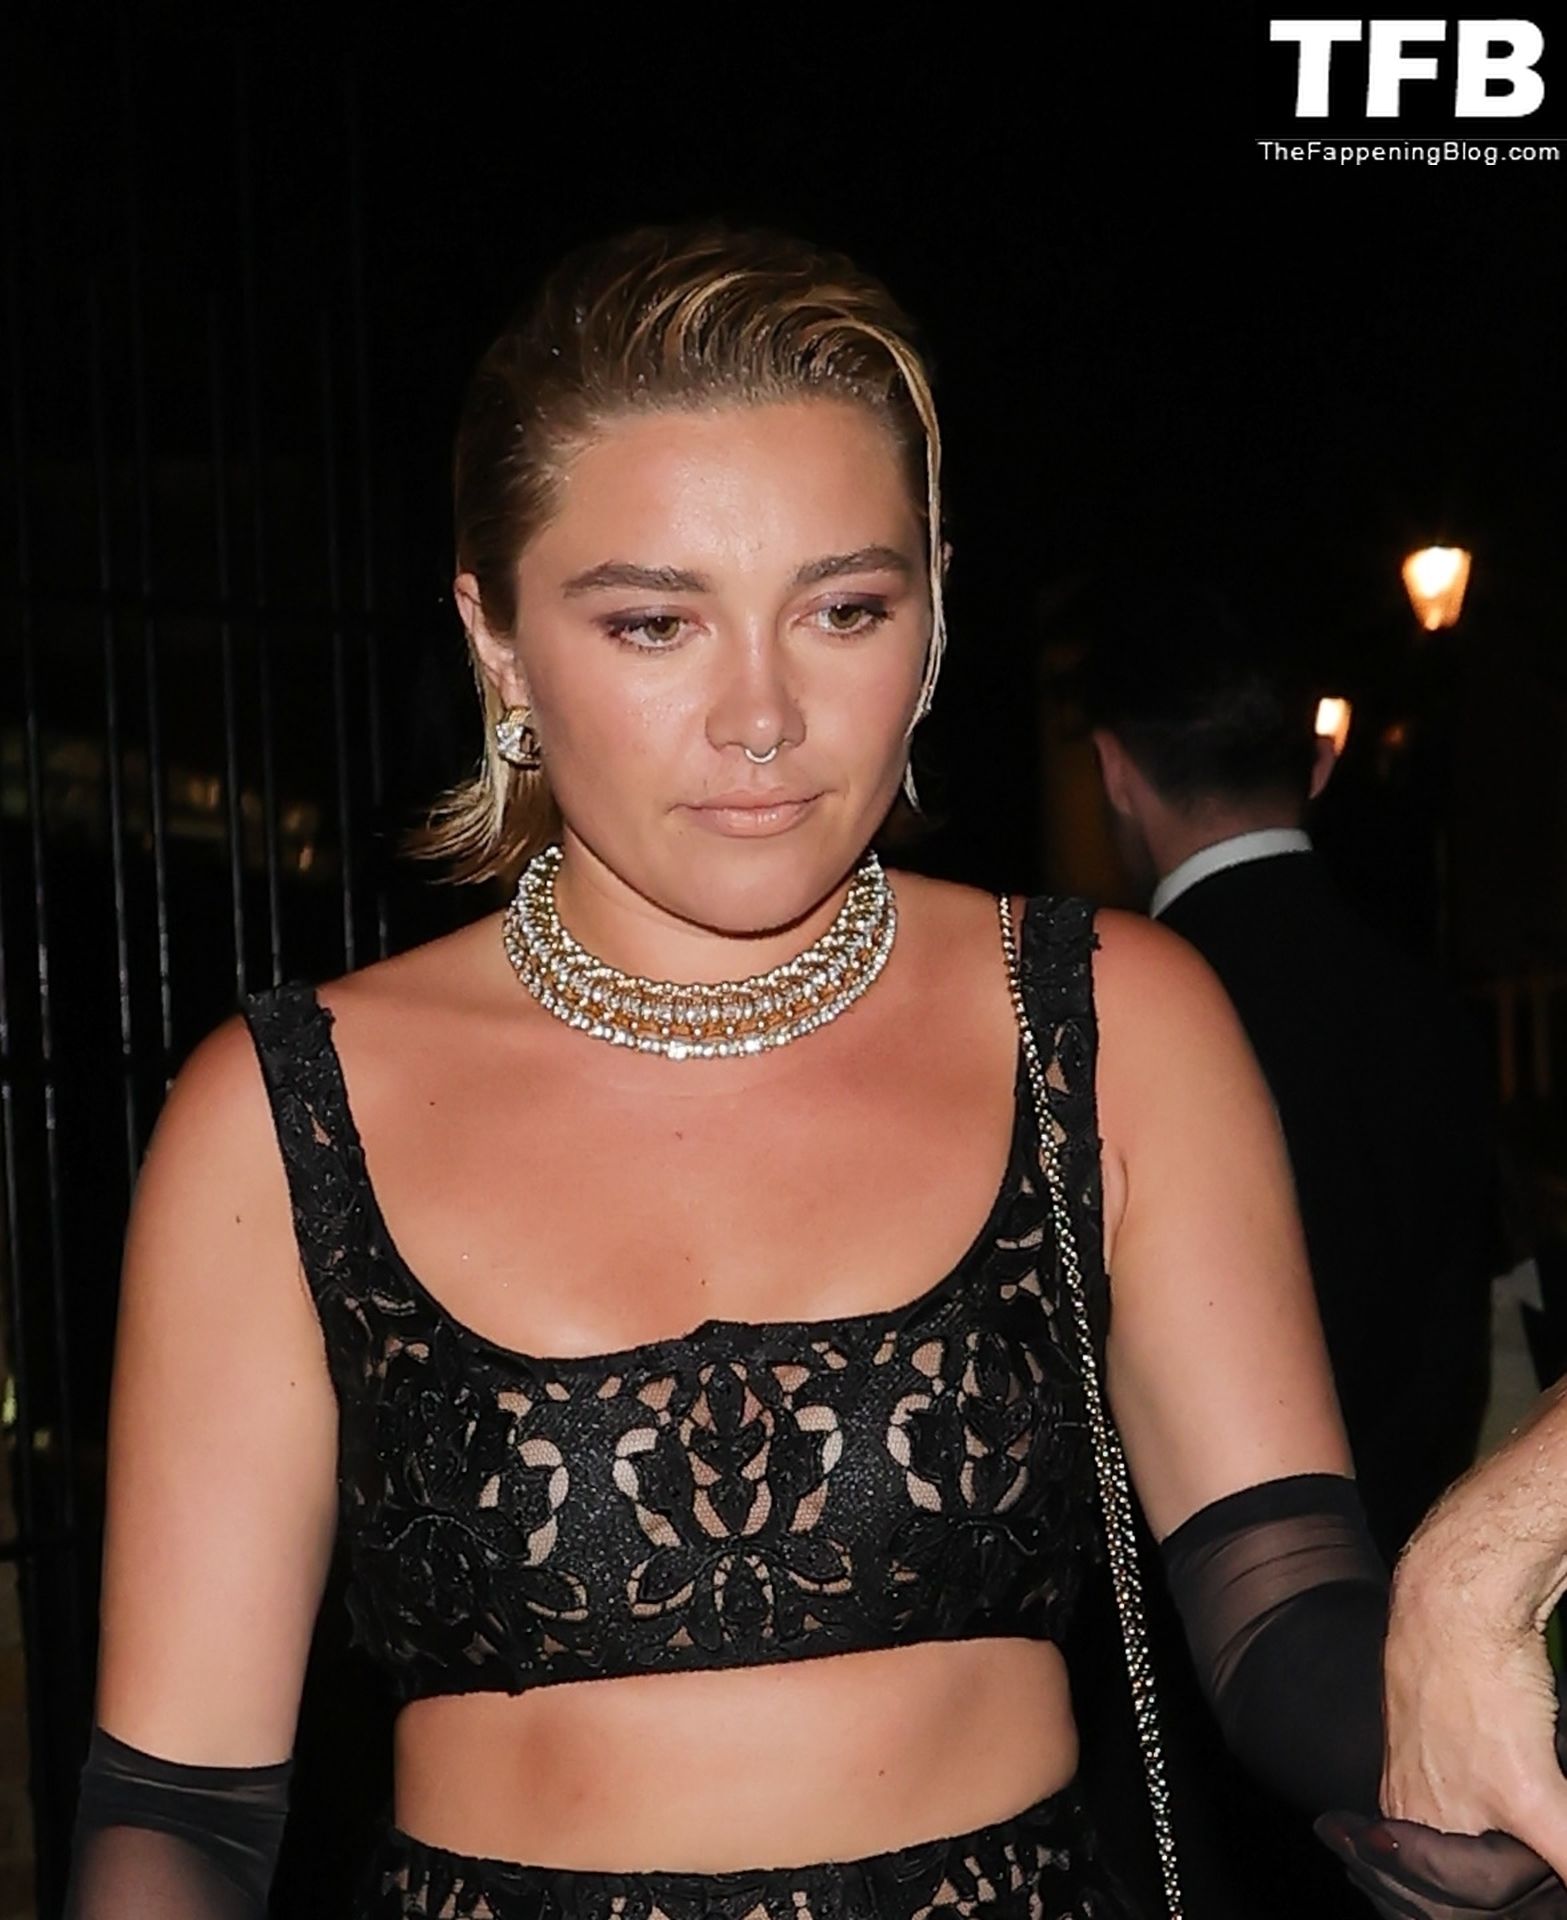 Florence-Pugh-Sexy-The-Fappening-Blog-54.jpg